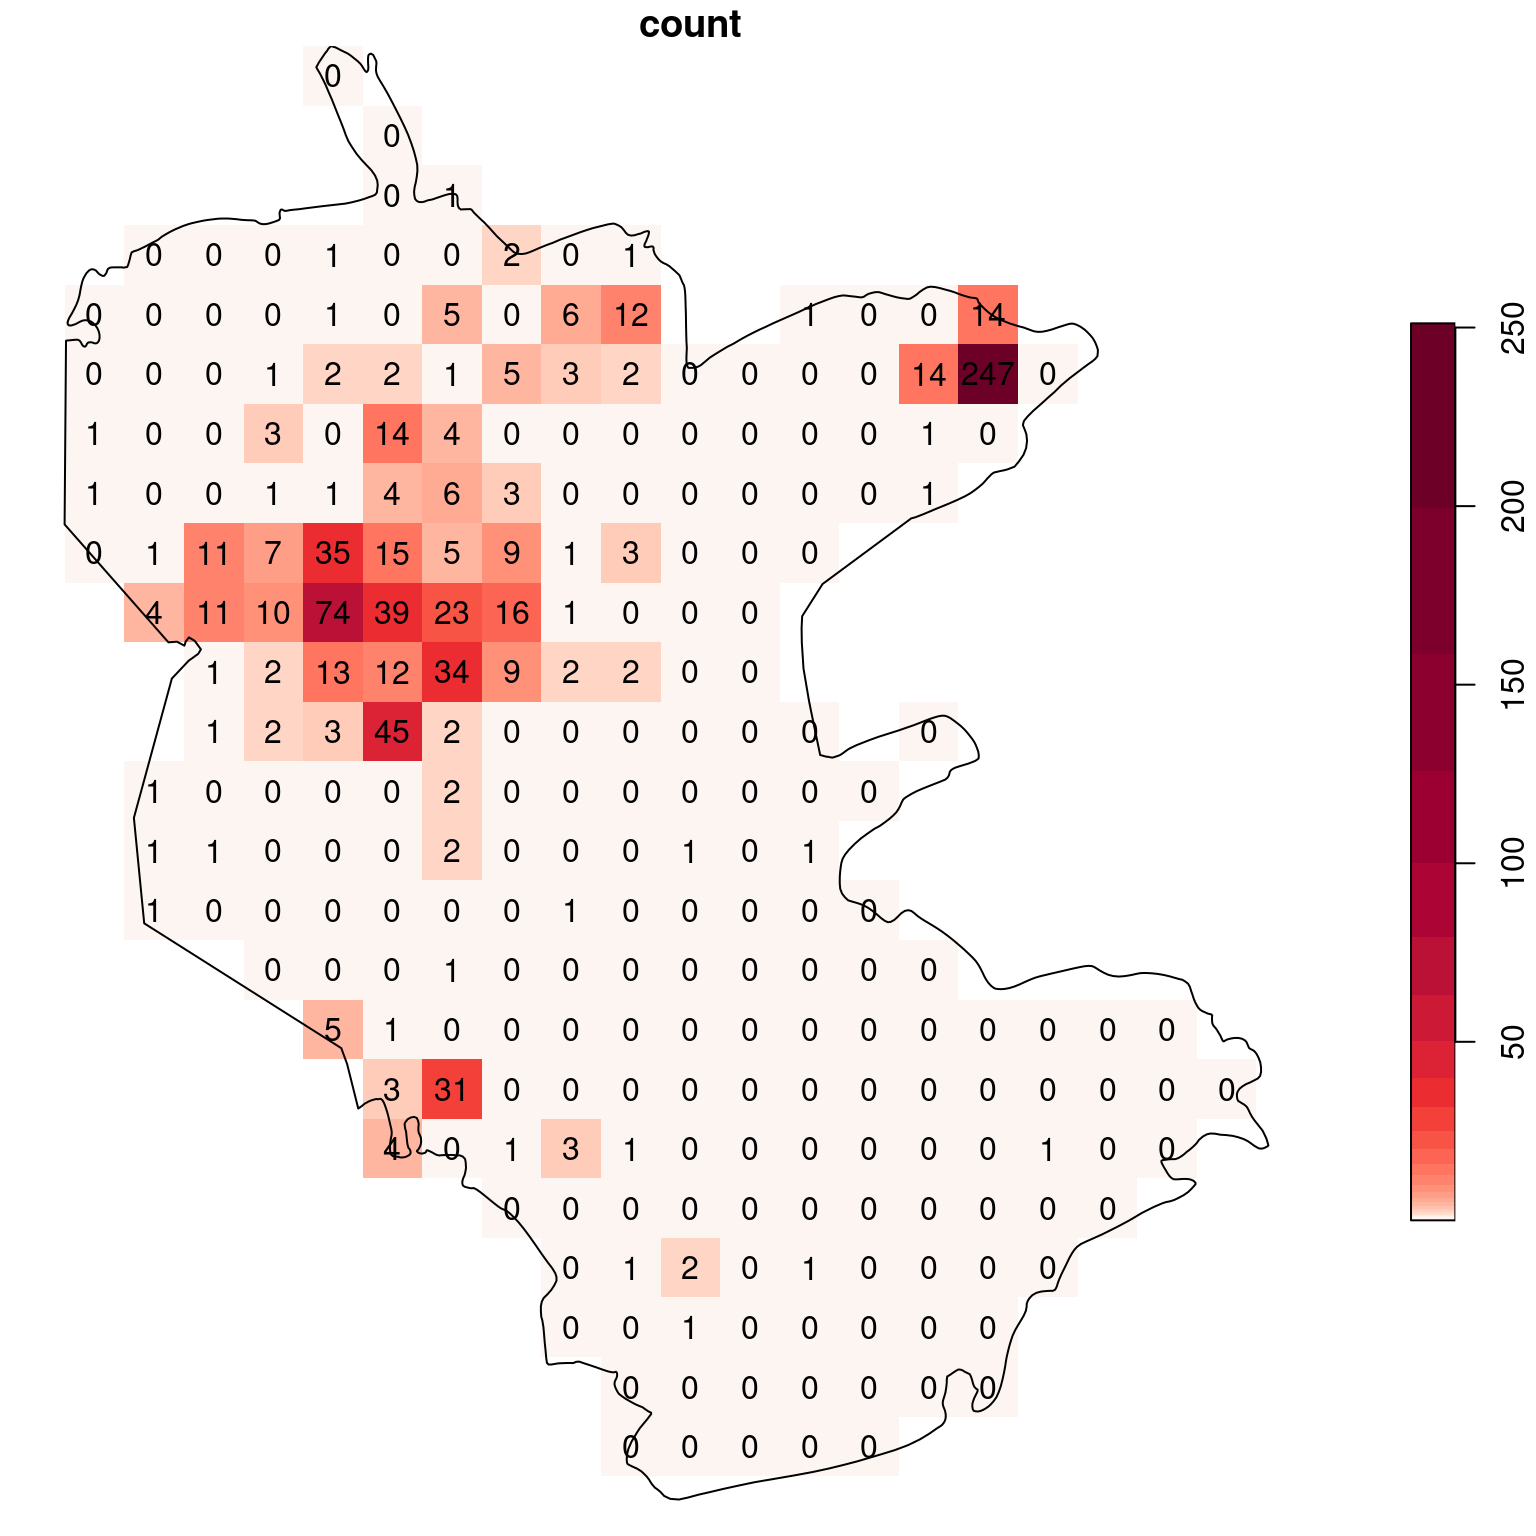 Density (observations per pixel) of rare plants in the nature reserve, with a logarithmic scale